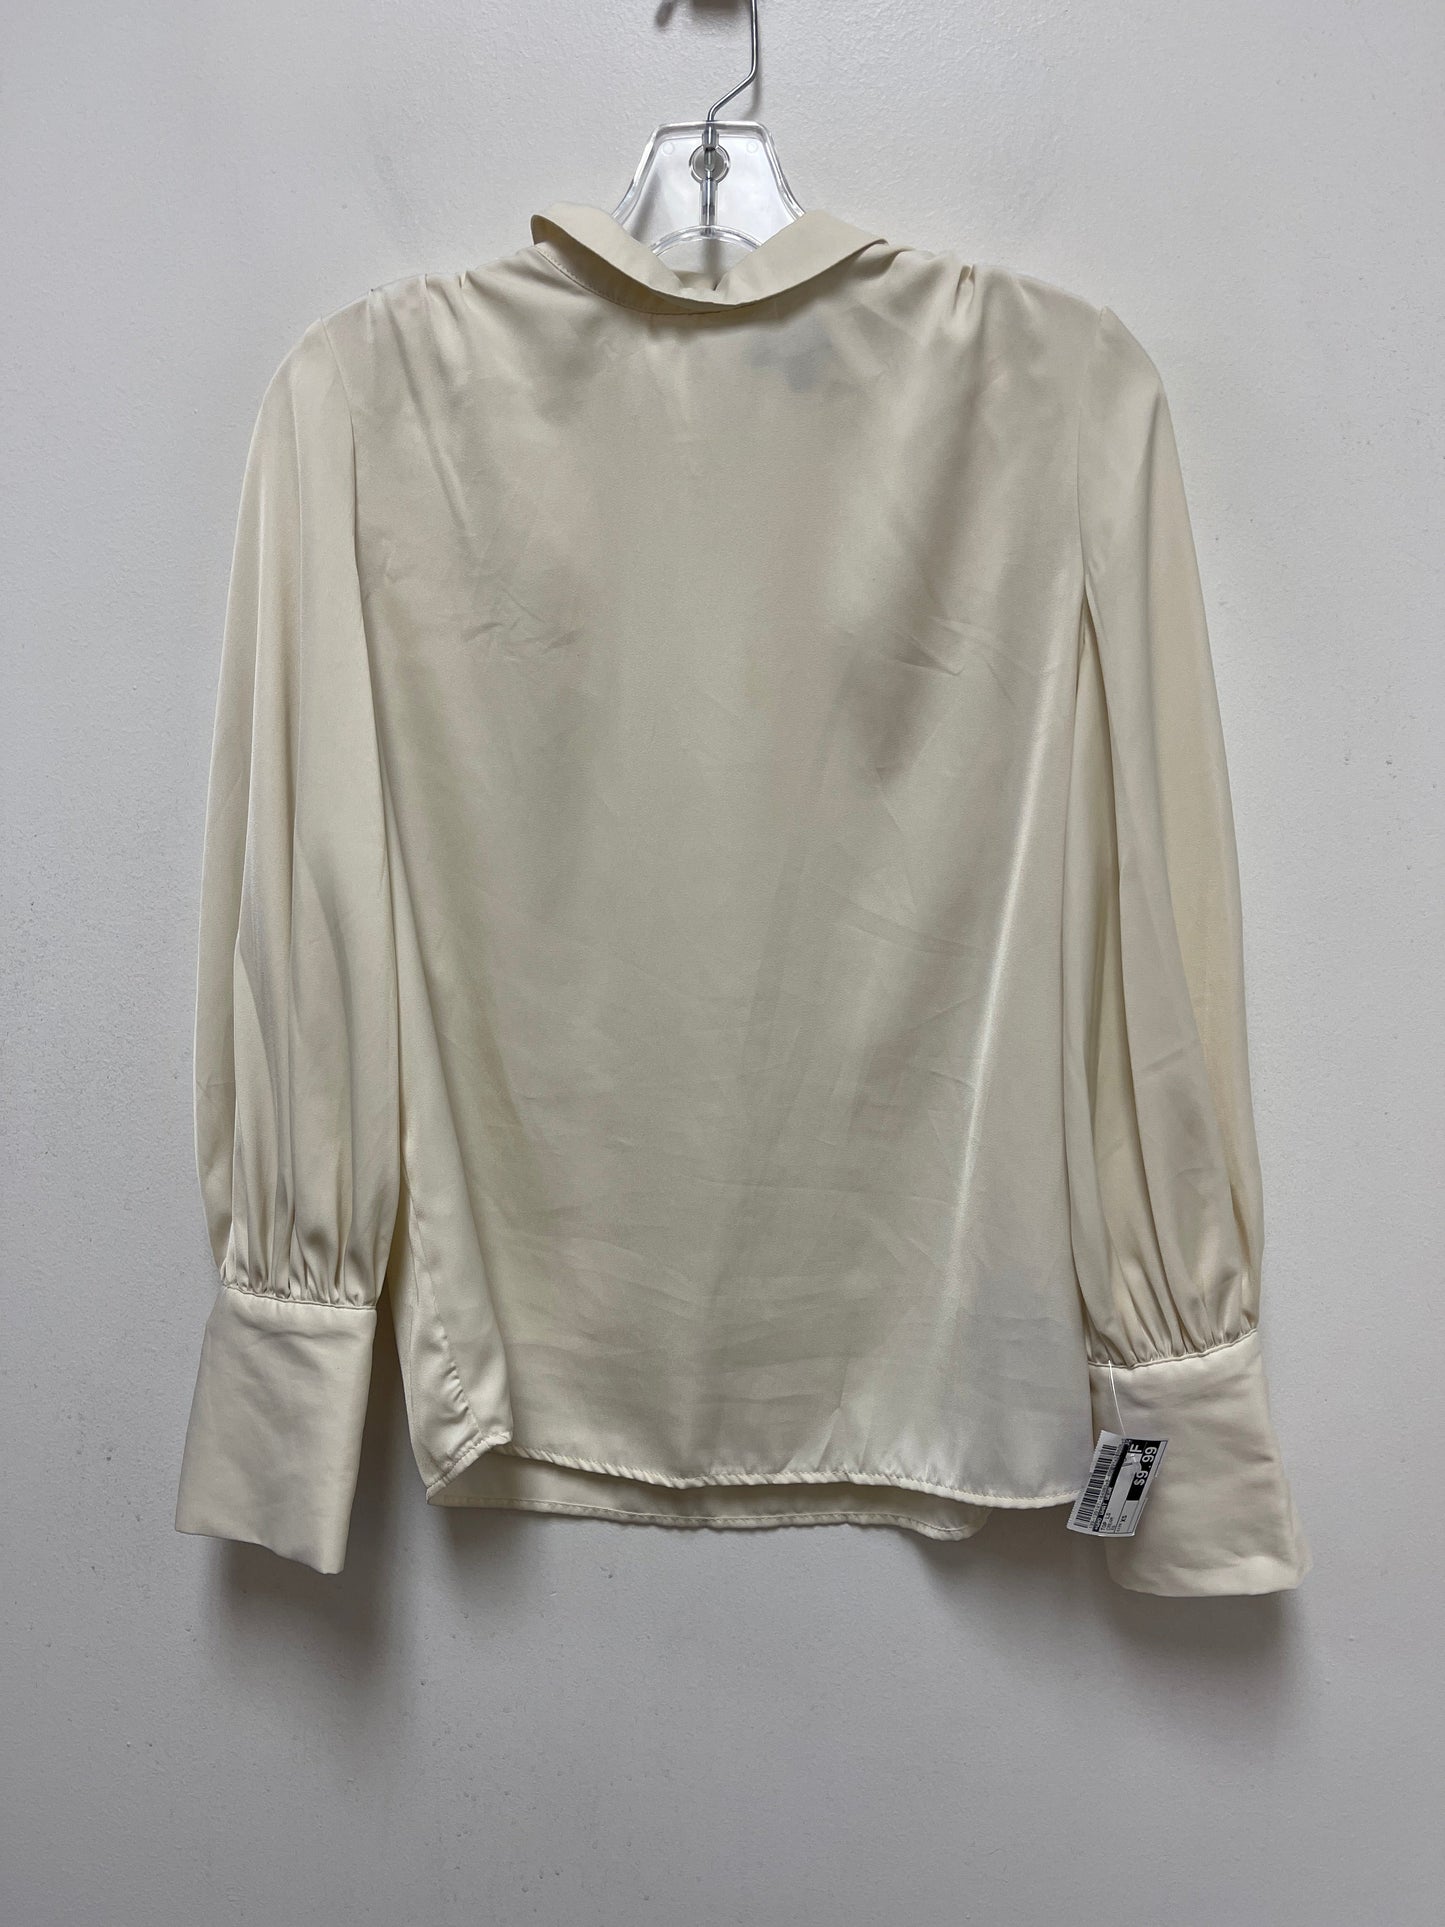 Cream Top Long Sleeve Who What Wear, Size Xs